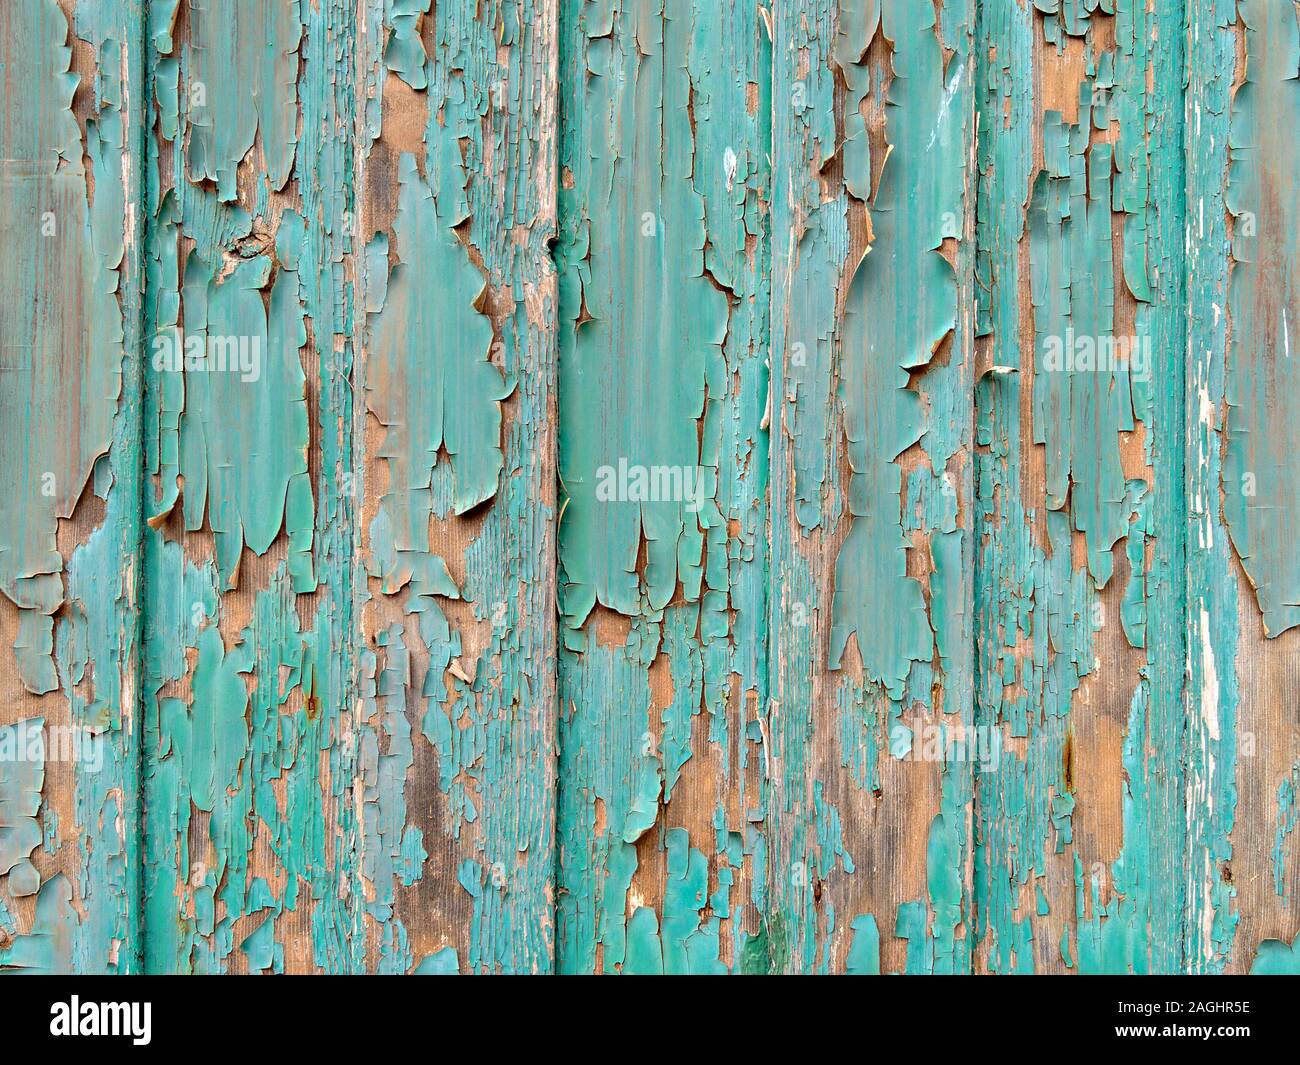 Old peeling and flaking green paint on wooden slats Stock Photo